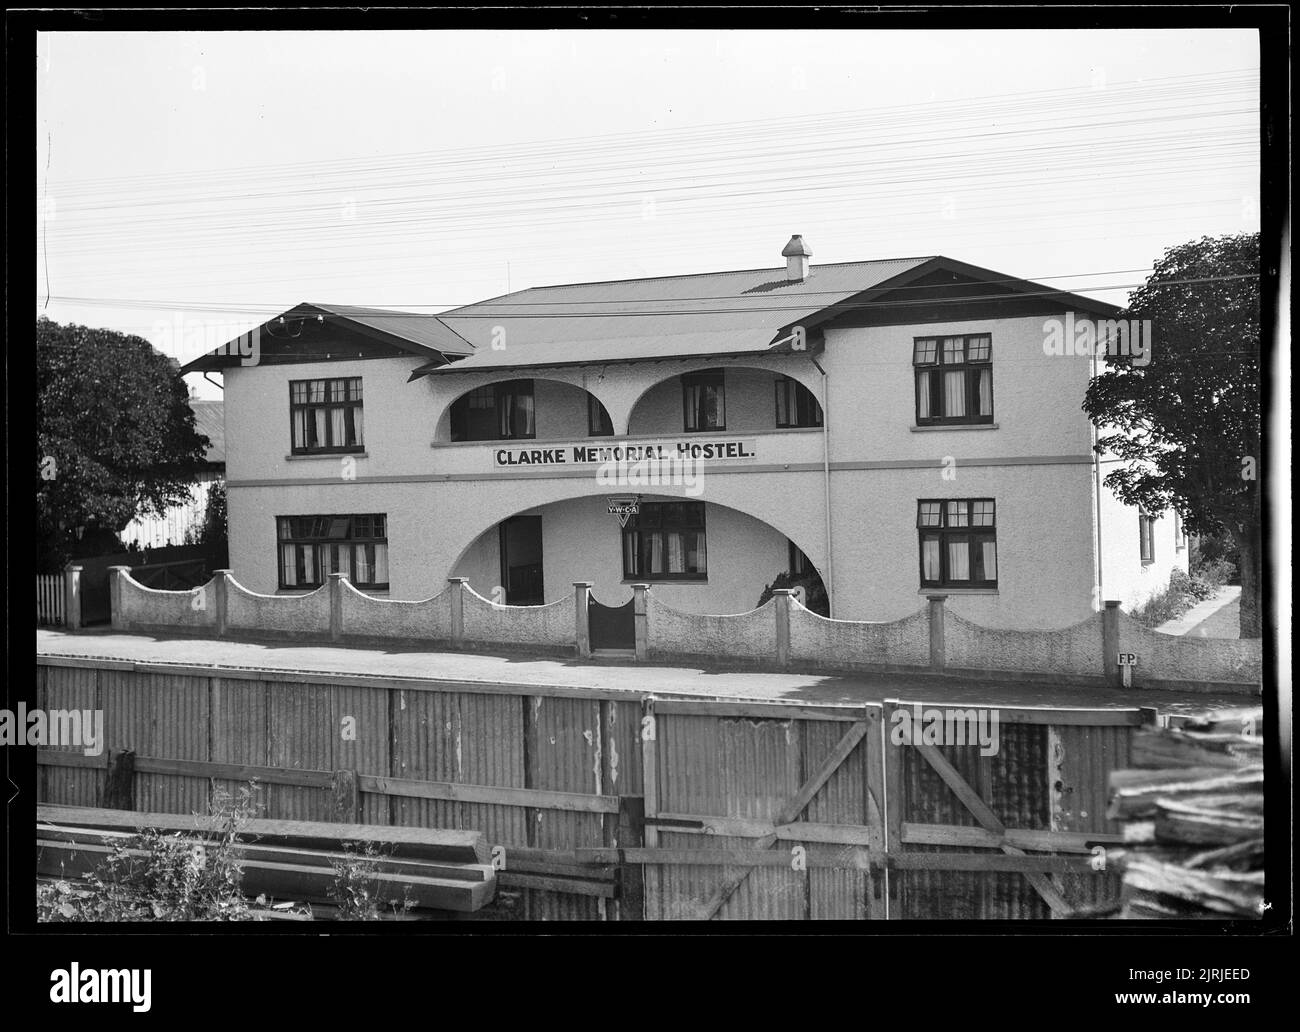 Young Women's Christian Association (YWCA) Hostel, New Plymouth, circa 1928, maker unknown. F B Butler/Crown Studios Collection. Gift of Frederick B Butler, 1971. Stock Photo